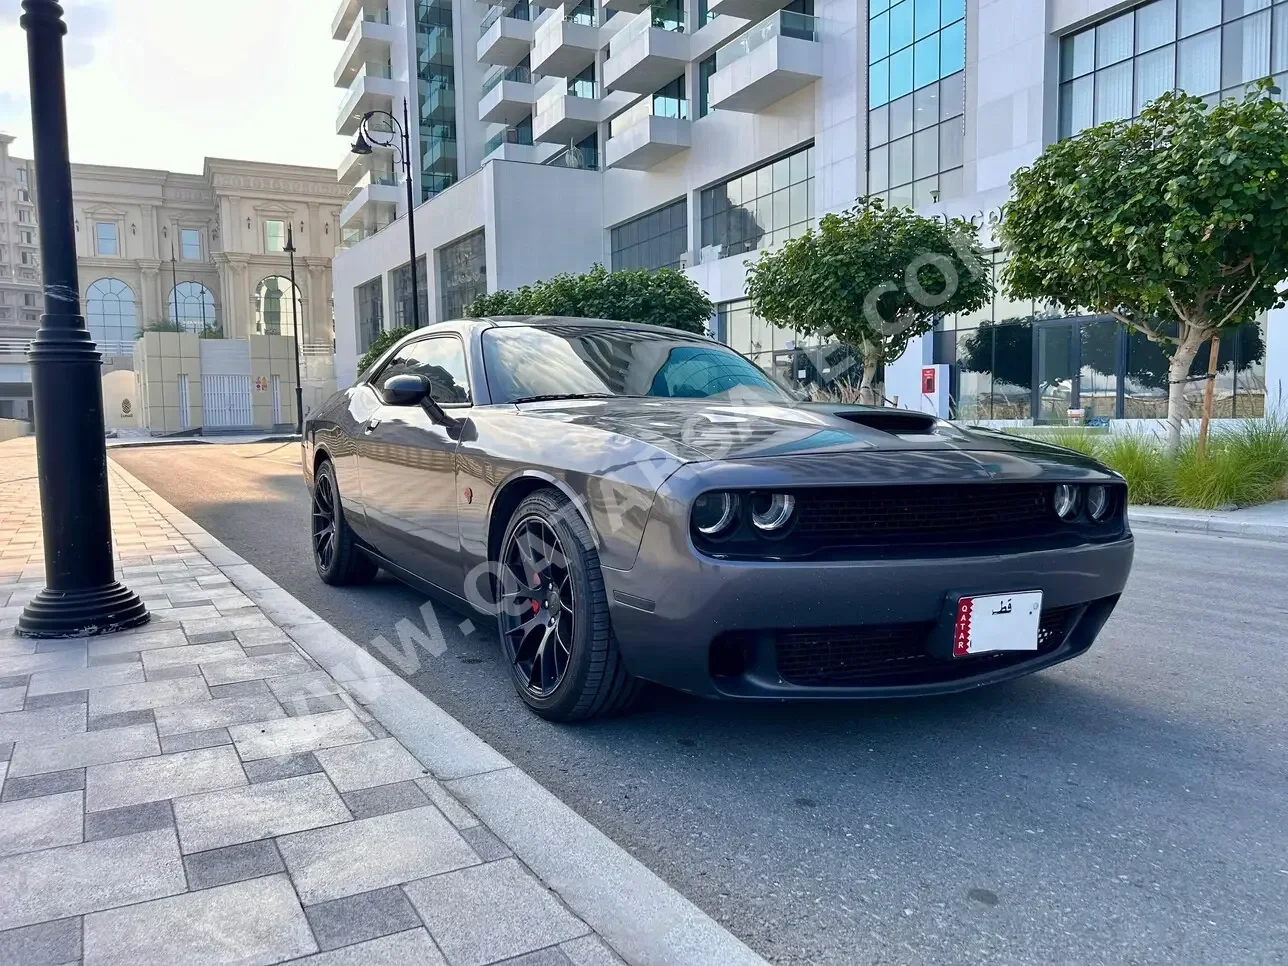 Dodge  Challenger  SRT-8  2013  Automatic  145,000 Km  8 Cylinder  Rear Wheel Drive (RWD)  Coupe / Sport  Gray